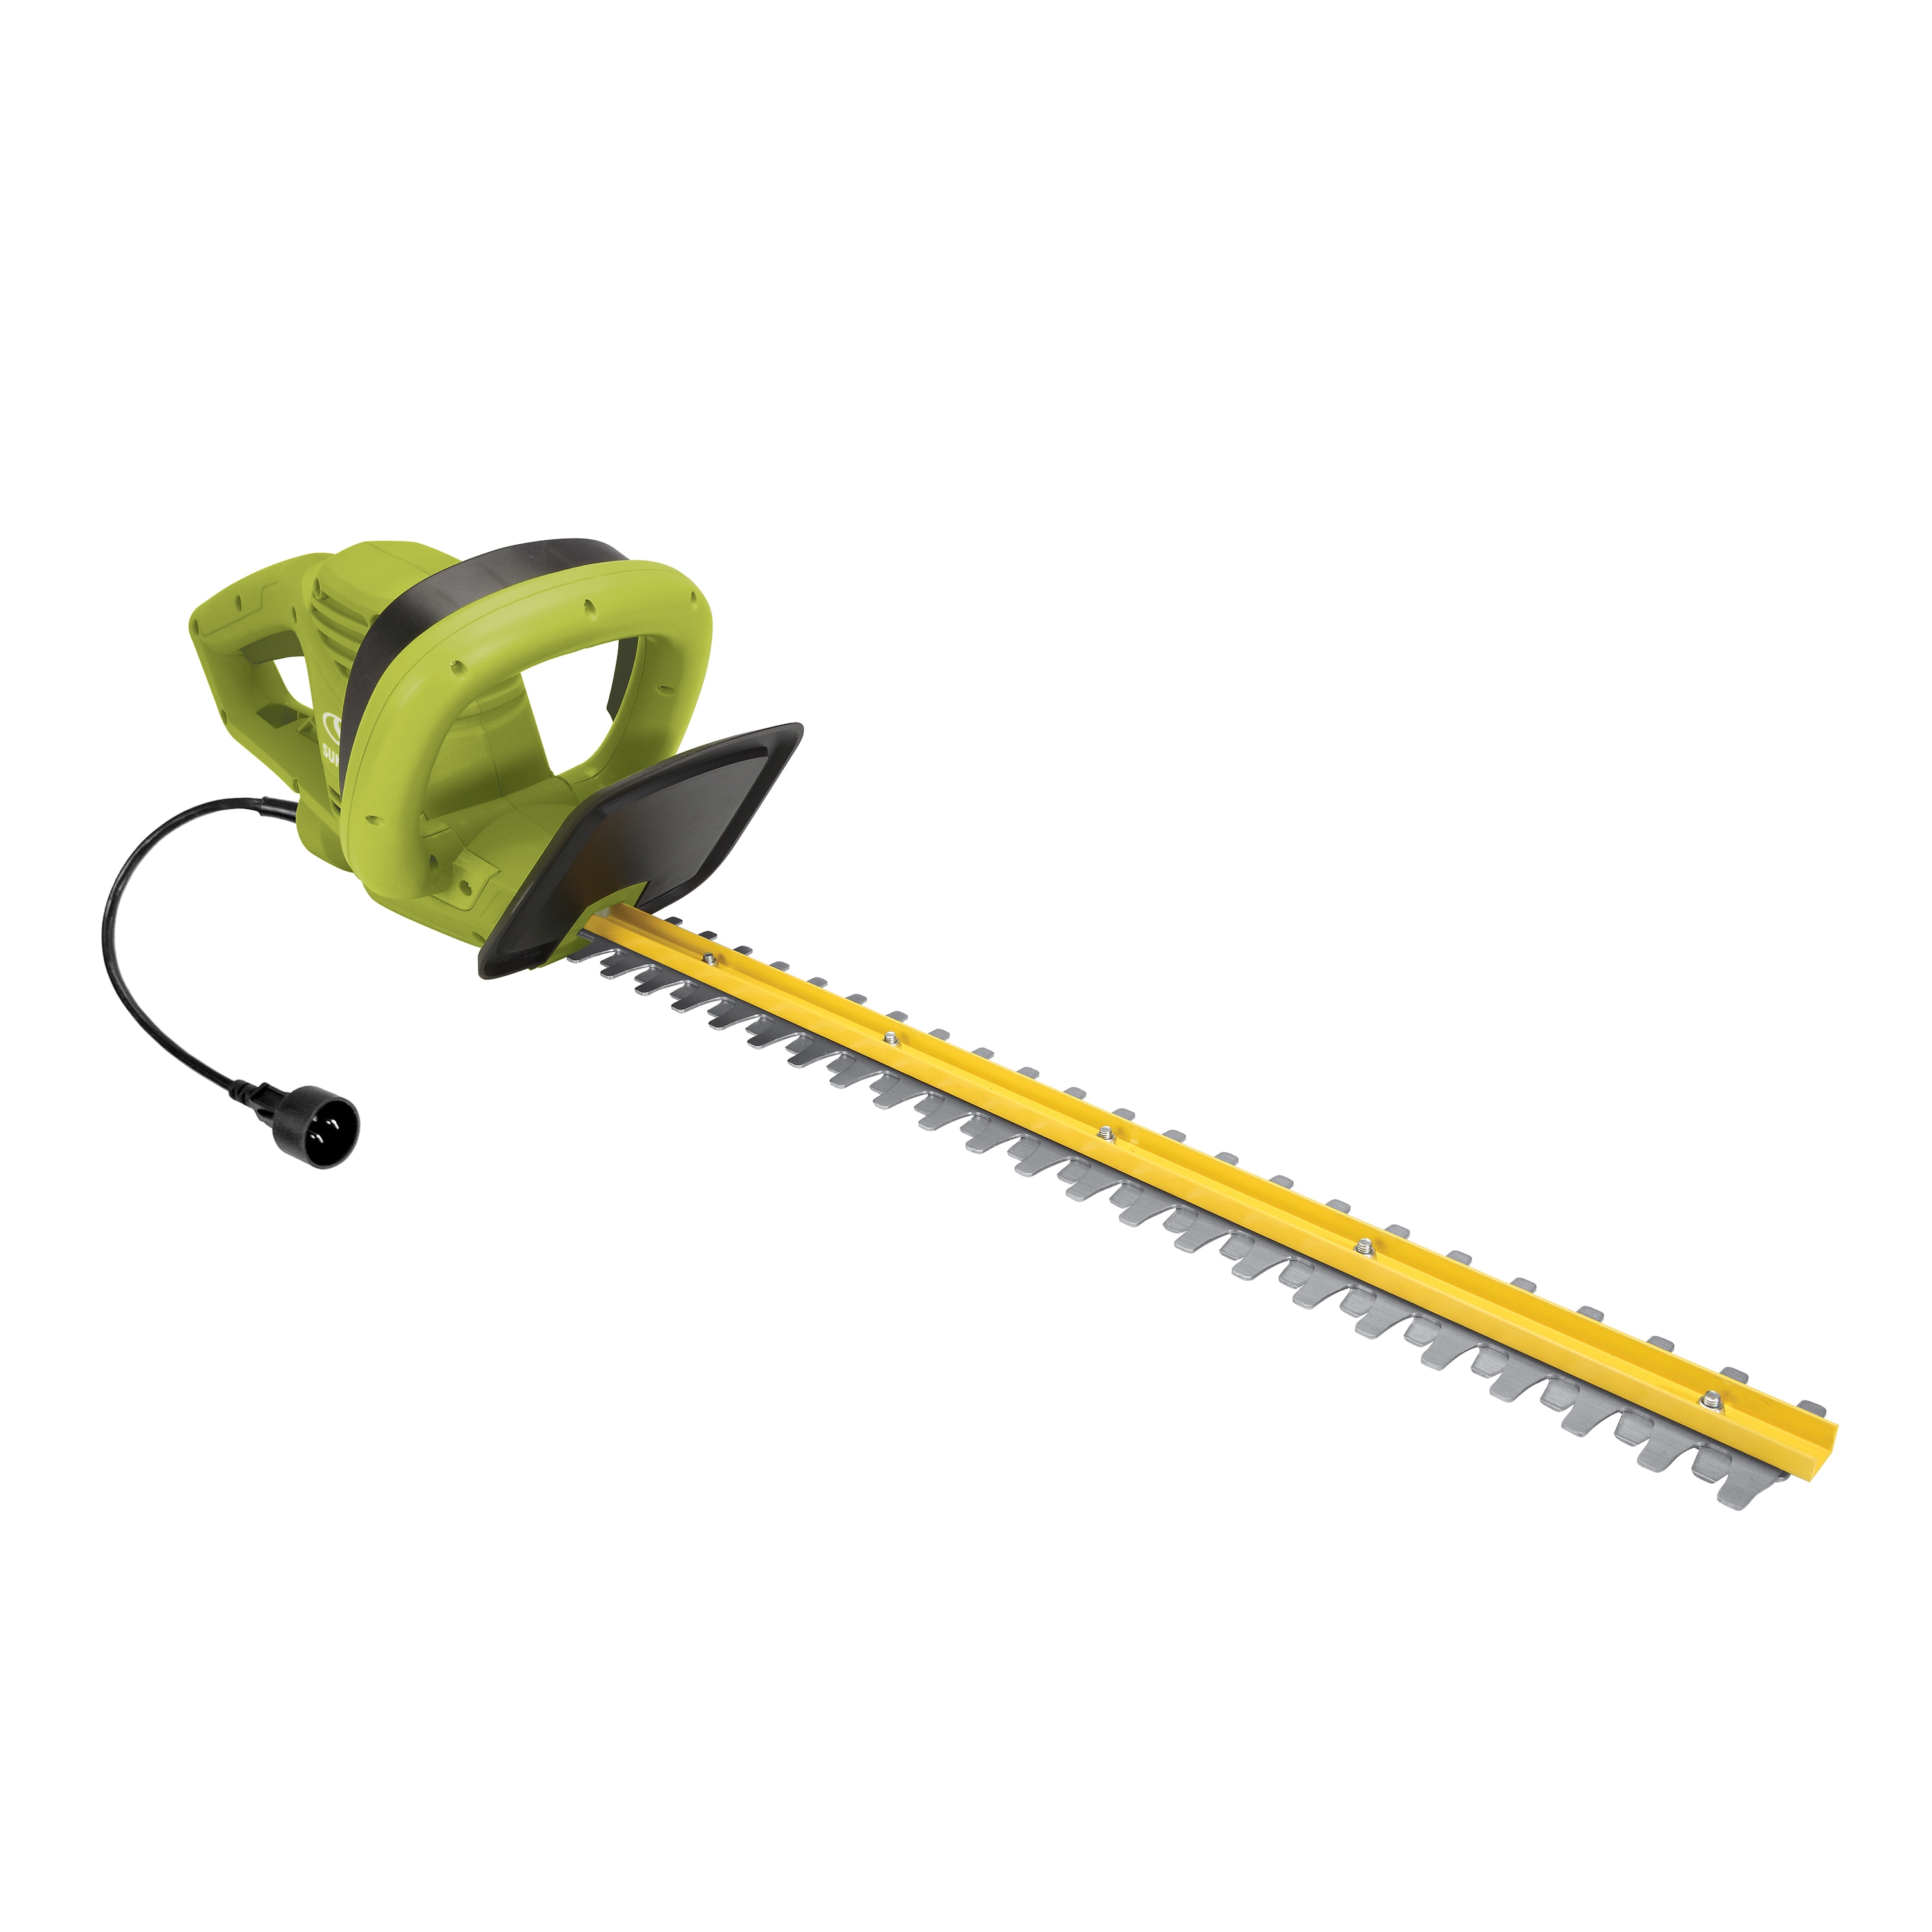 Electric Hedge Trimmer, 22-Inch